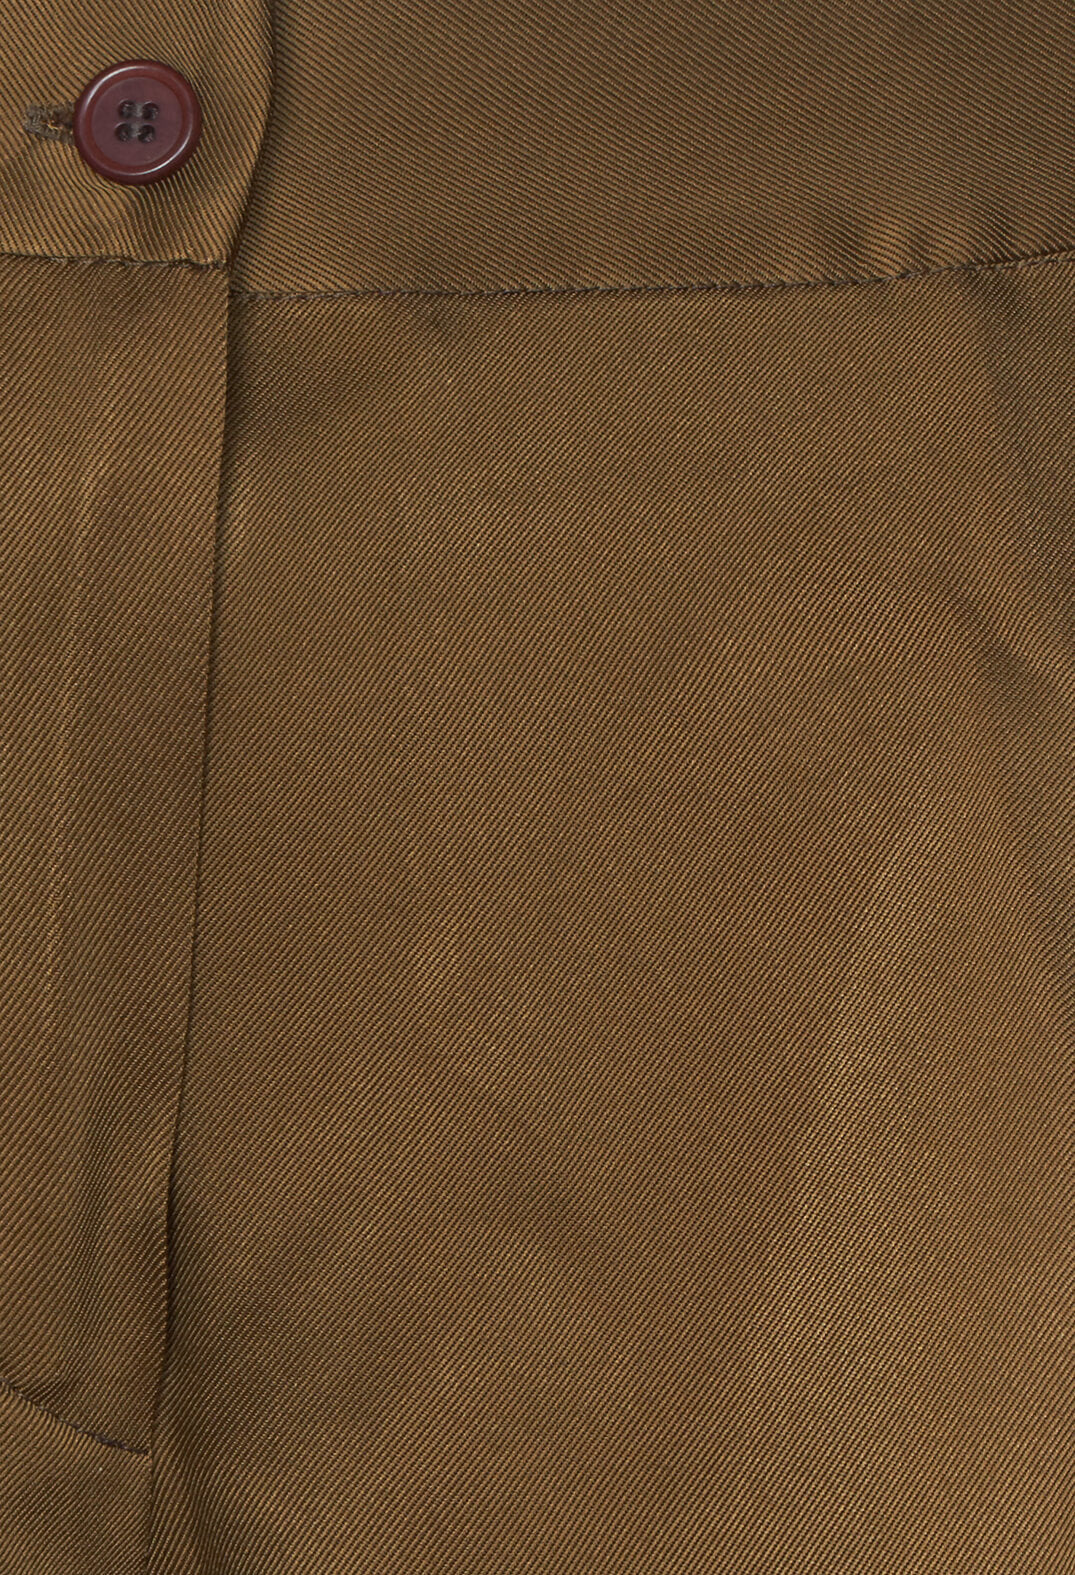 Straight Leg Pleated Trousers in Rust